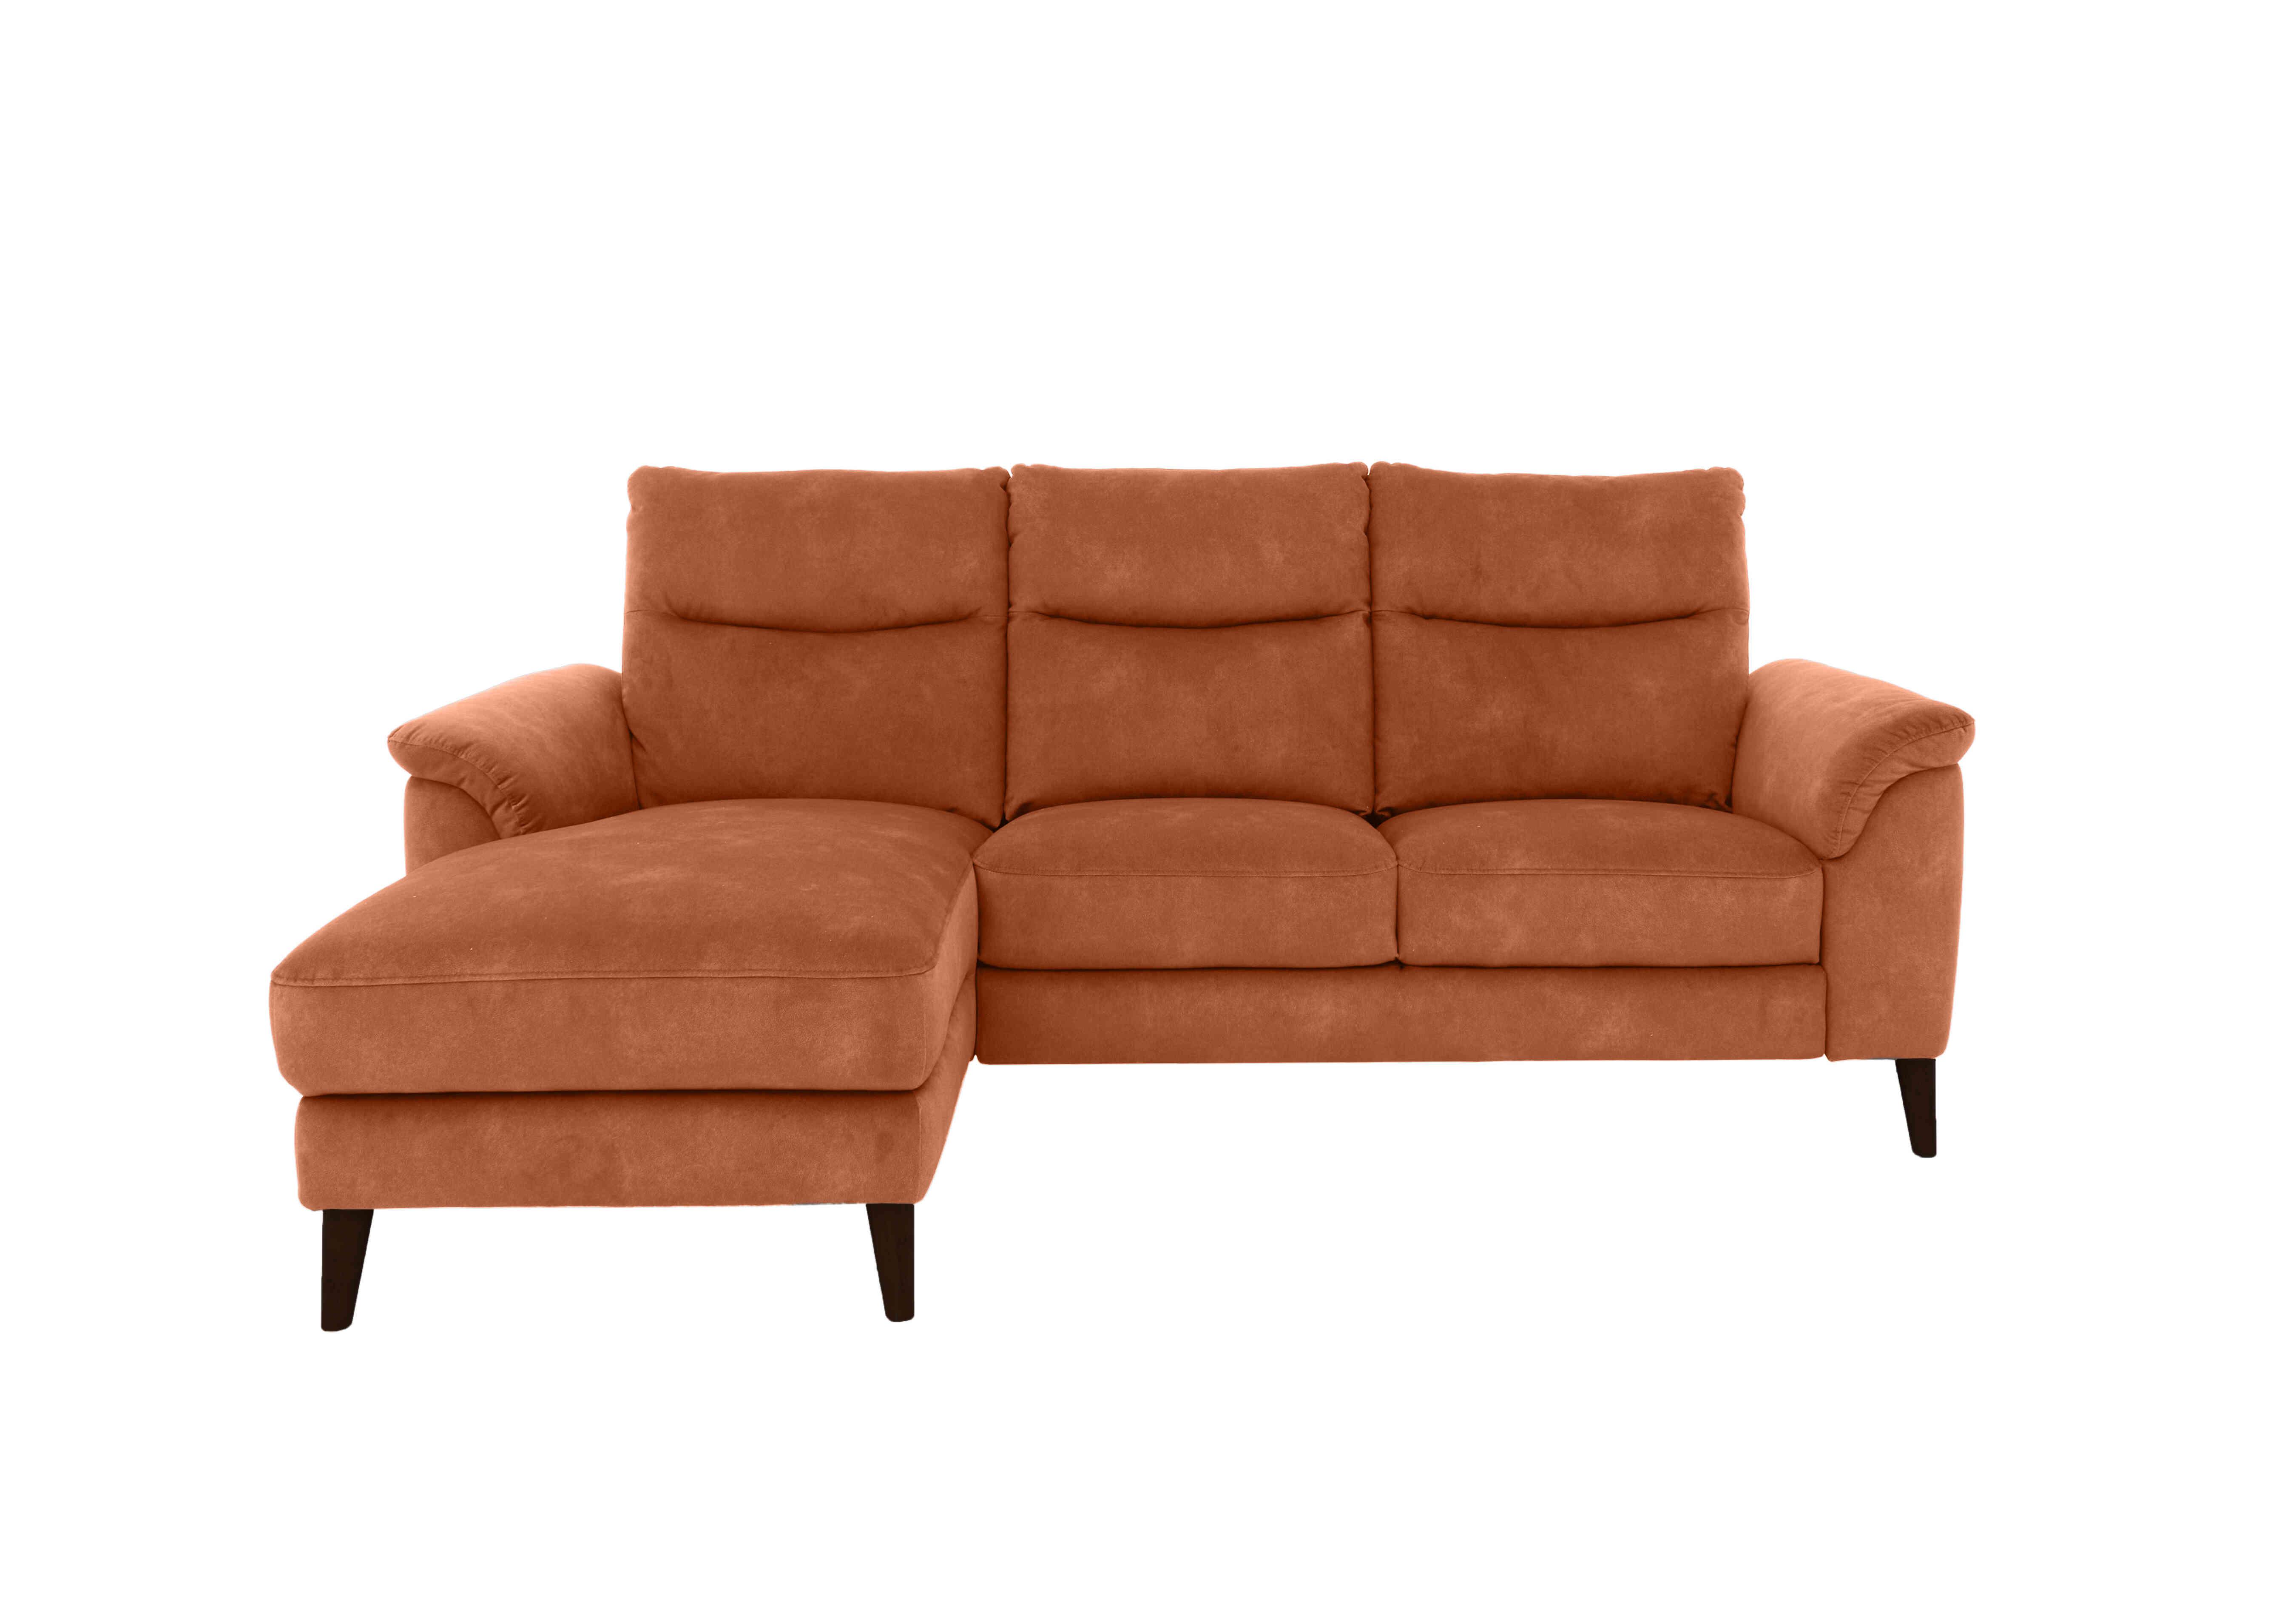 Morgan 3 Seater Fabric Sofa with Chaise End in Pumpkin Dexter 09 43509 on Furniture Village